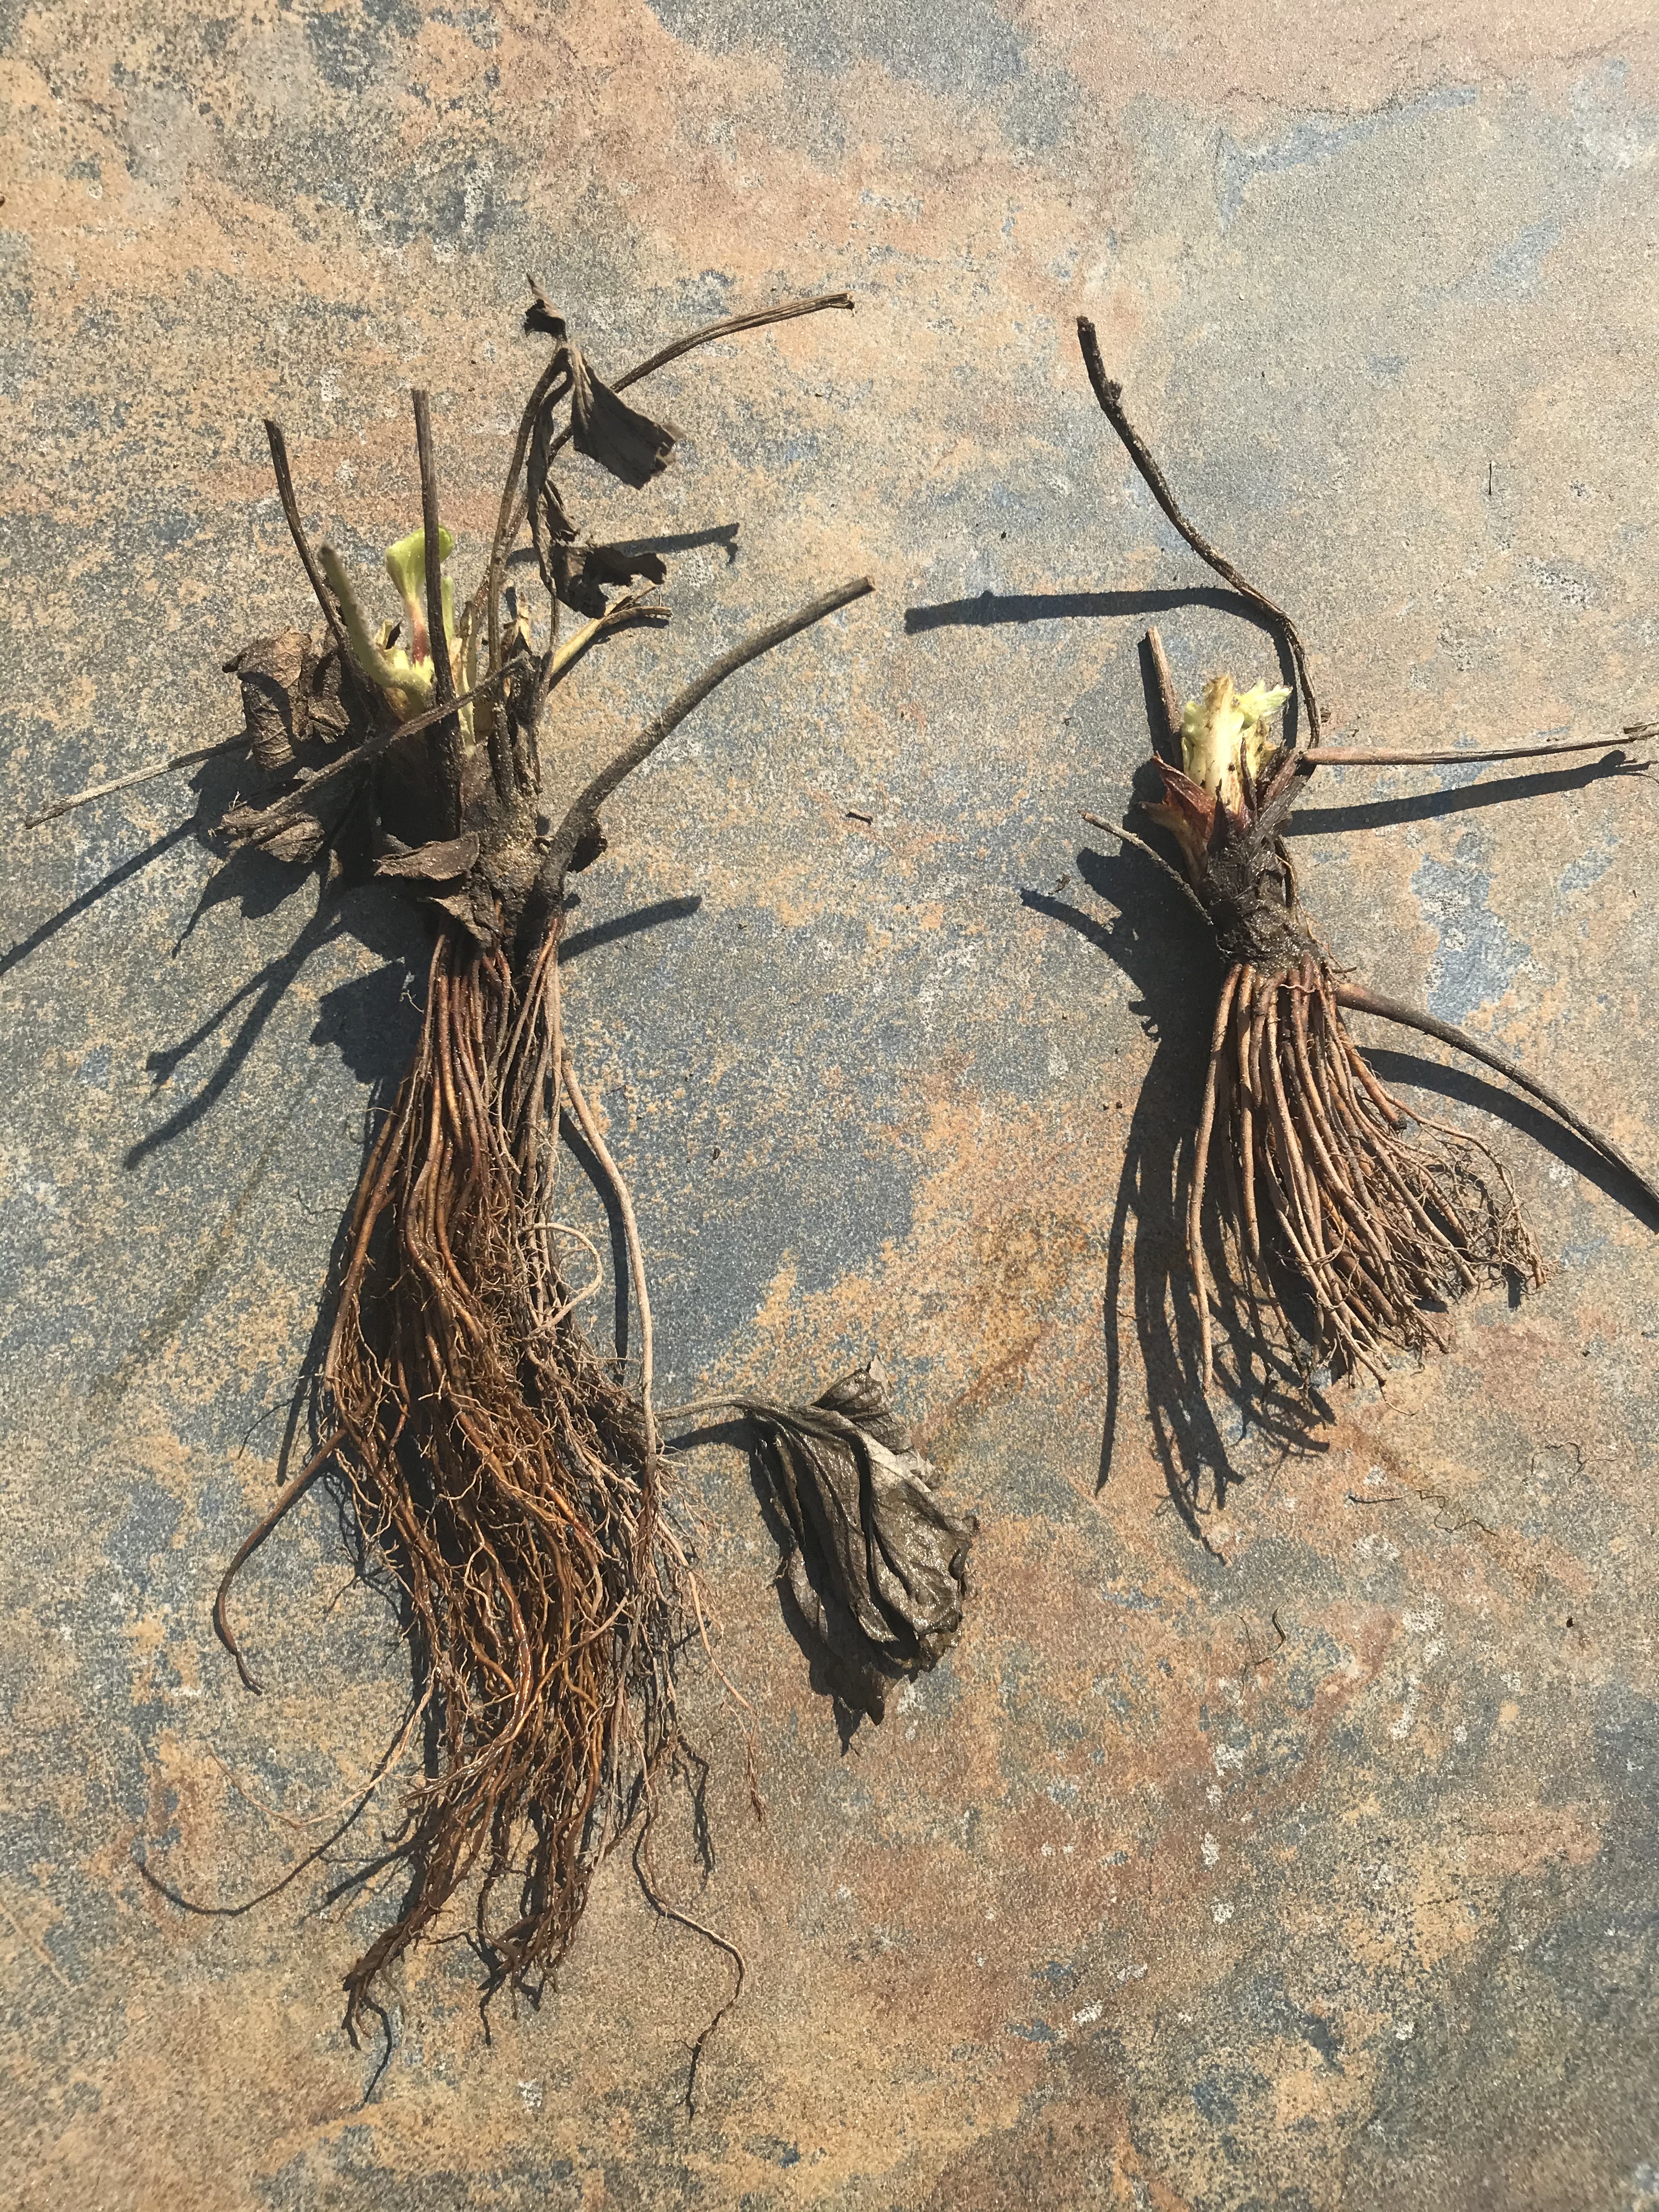 Bare root strawberries as they are sold on the left, demonstrating their long roots and a second image of the roots trimmed and ready to plant.